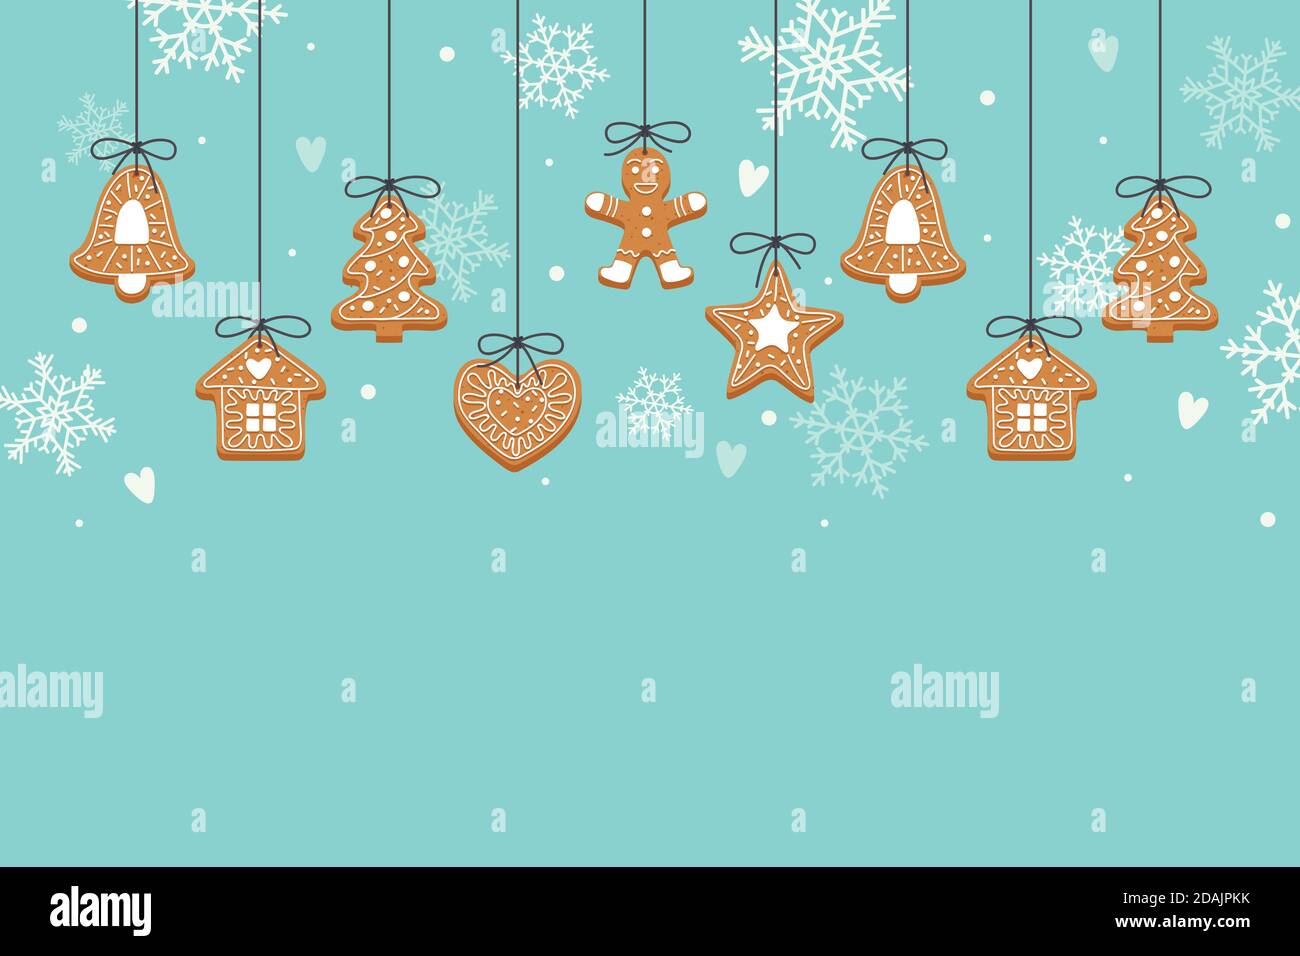 Christmas backgroung with hanging gingerbread cookies Stock Vector